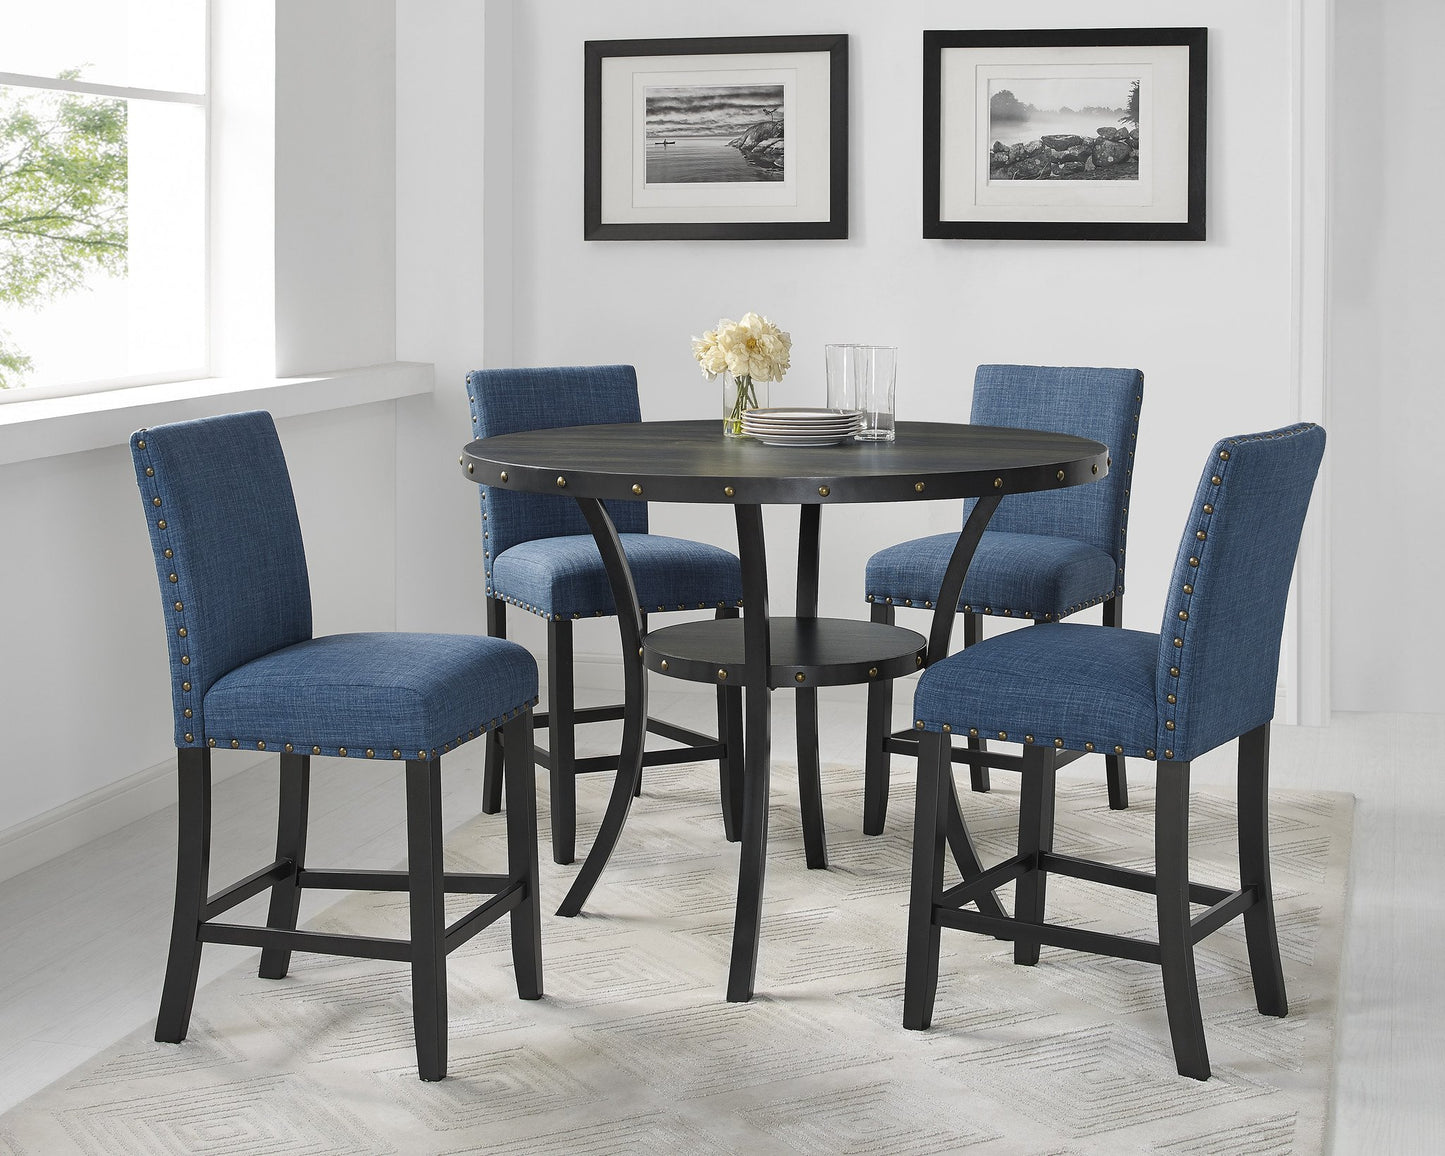 Biony Blue Fabric Counter Height Stools with Nailhead Trim, Set of 2